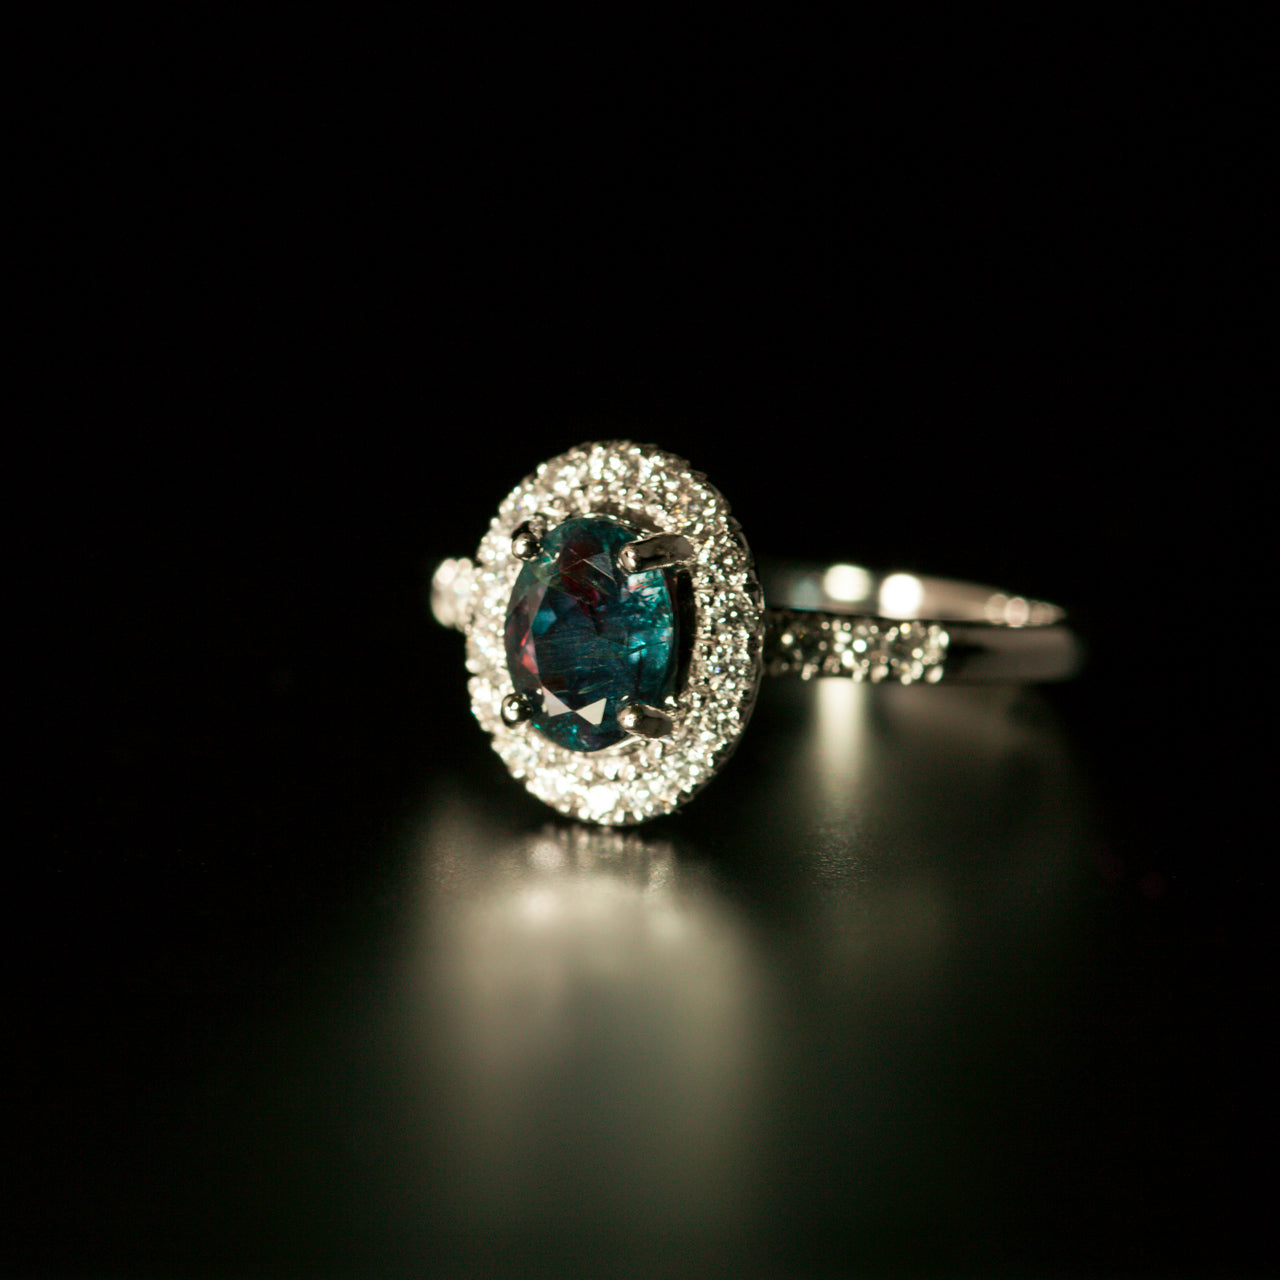 An 0.86ct natural alexandrite ring with a diamond halo in 18k white gold setting